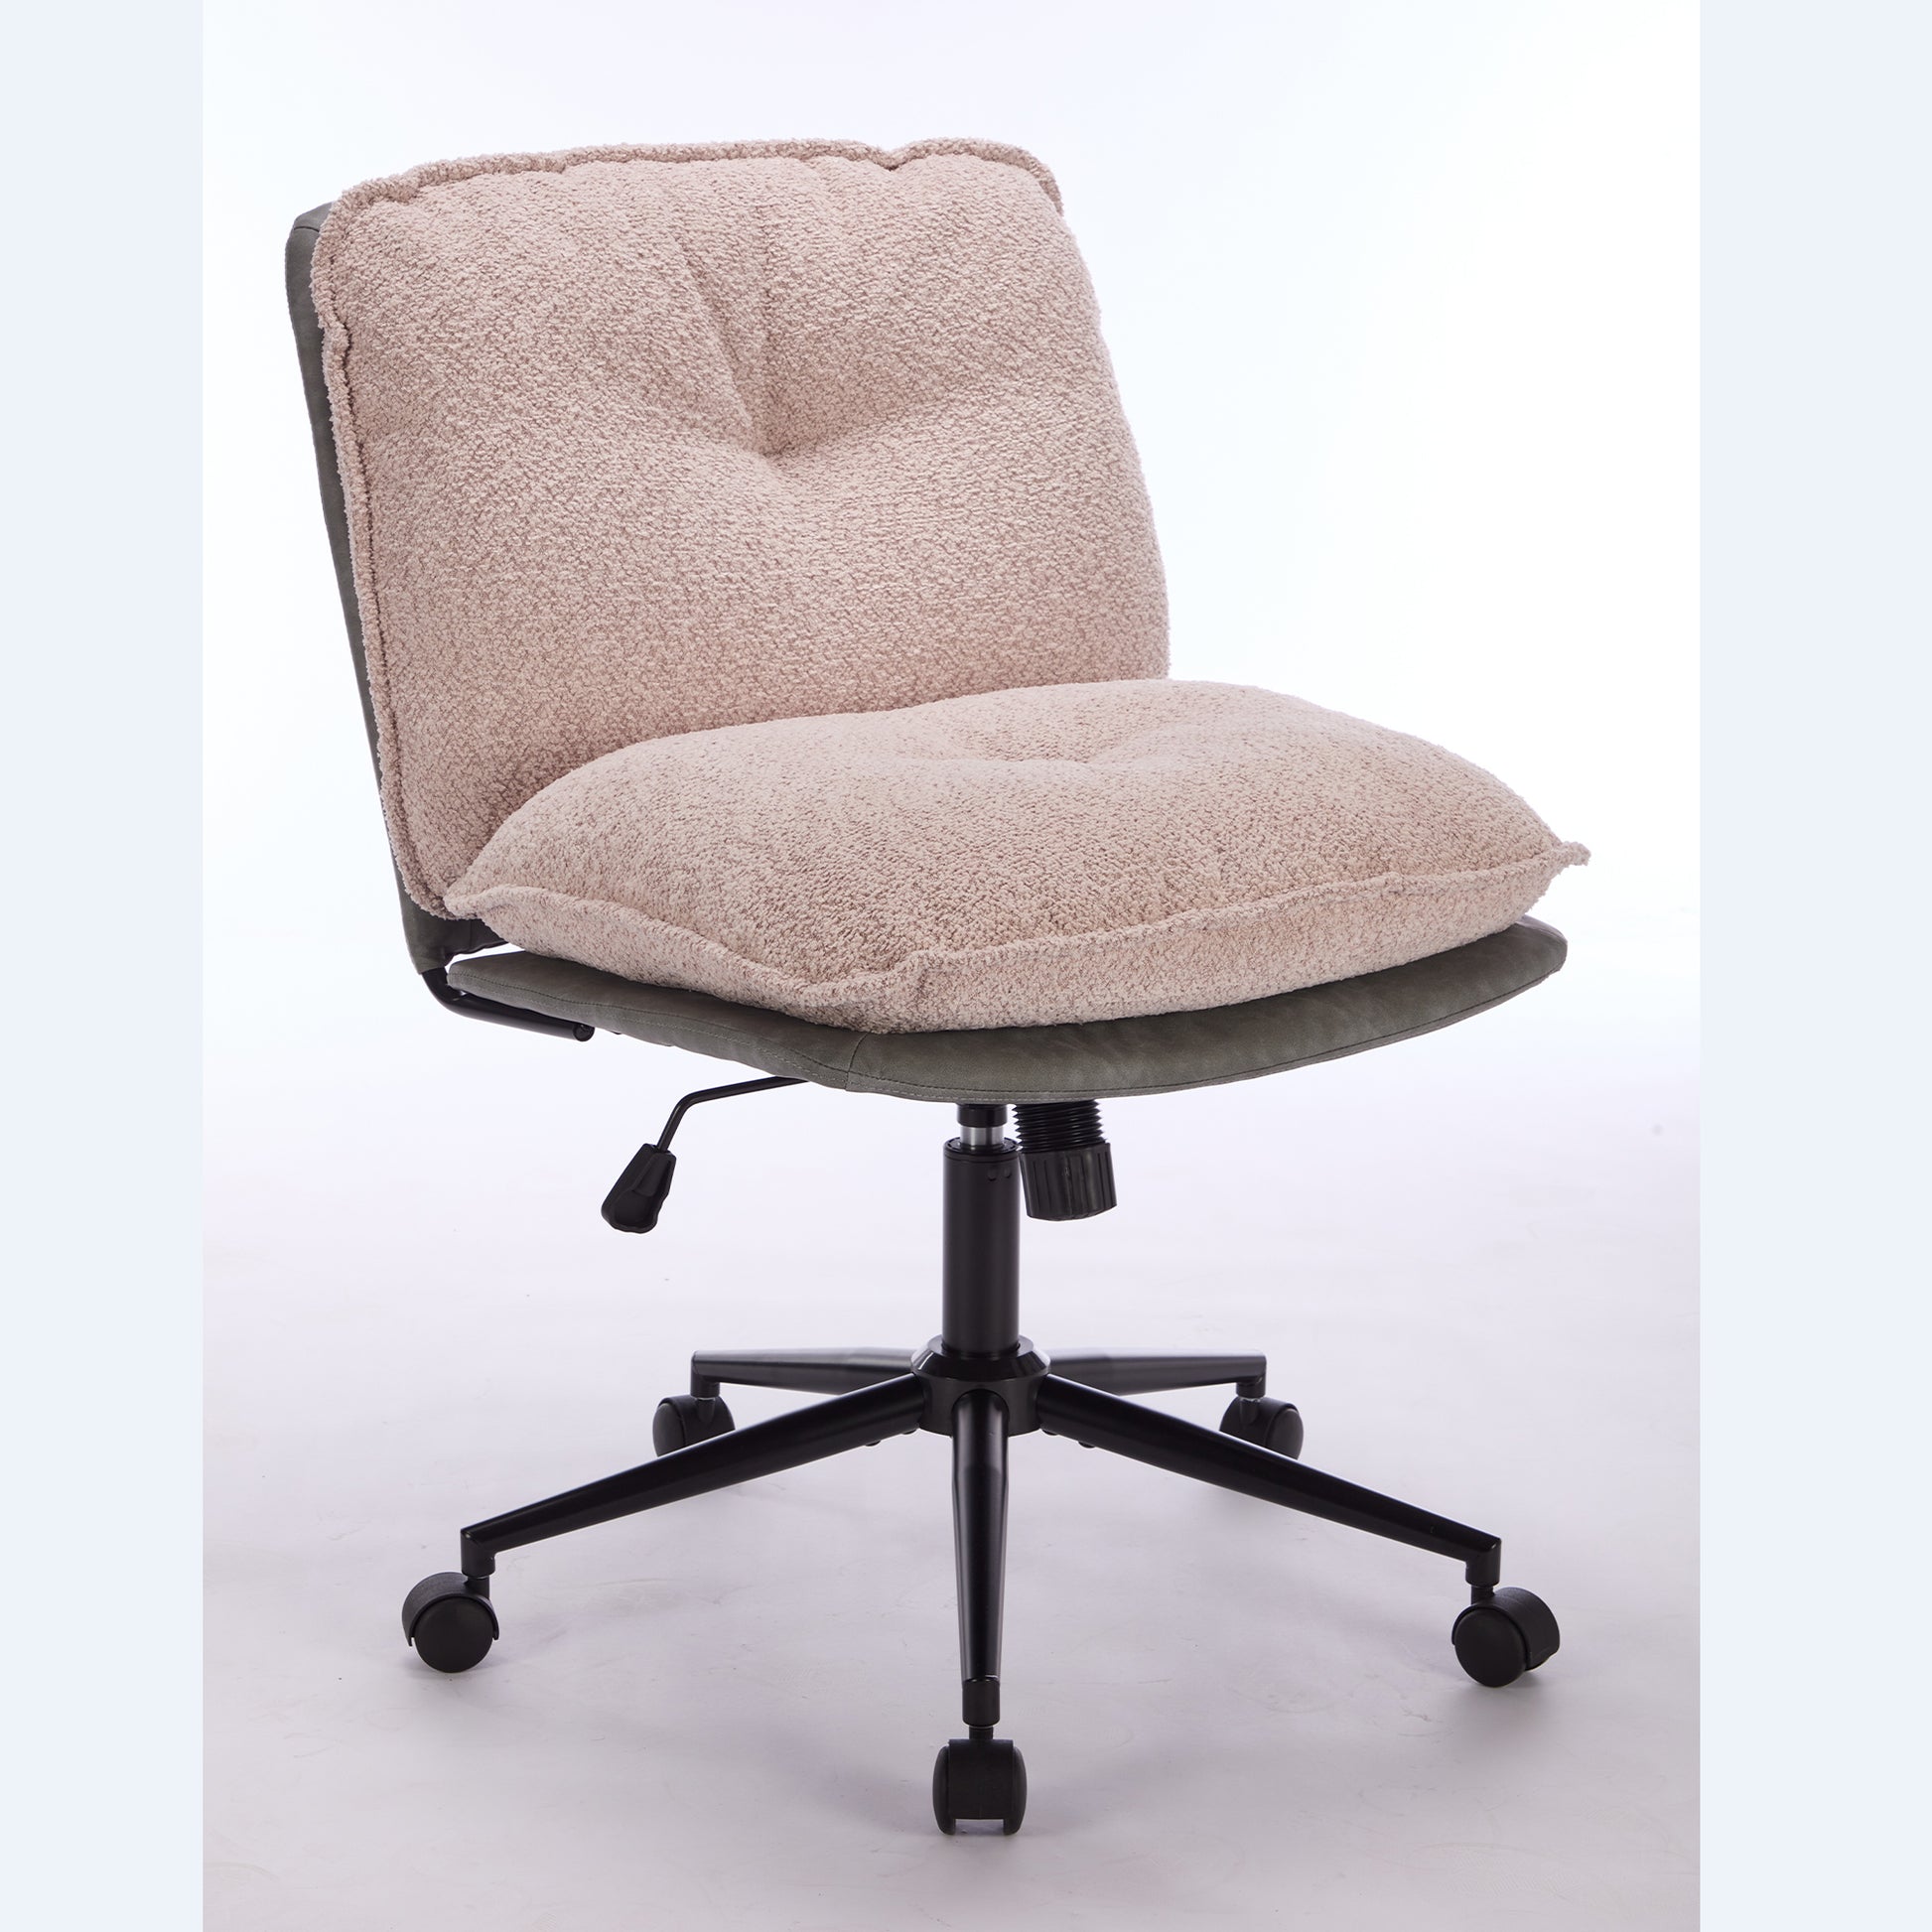 Oversize Seat Cirss Cross Chair With Wheels,